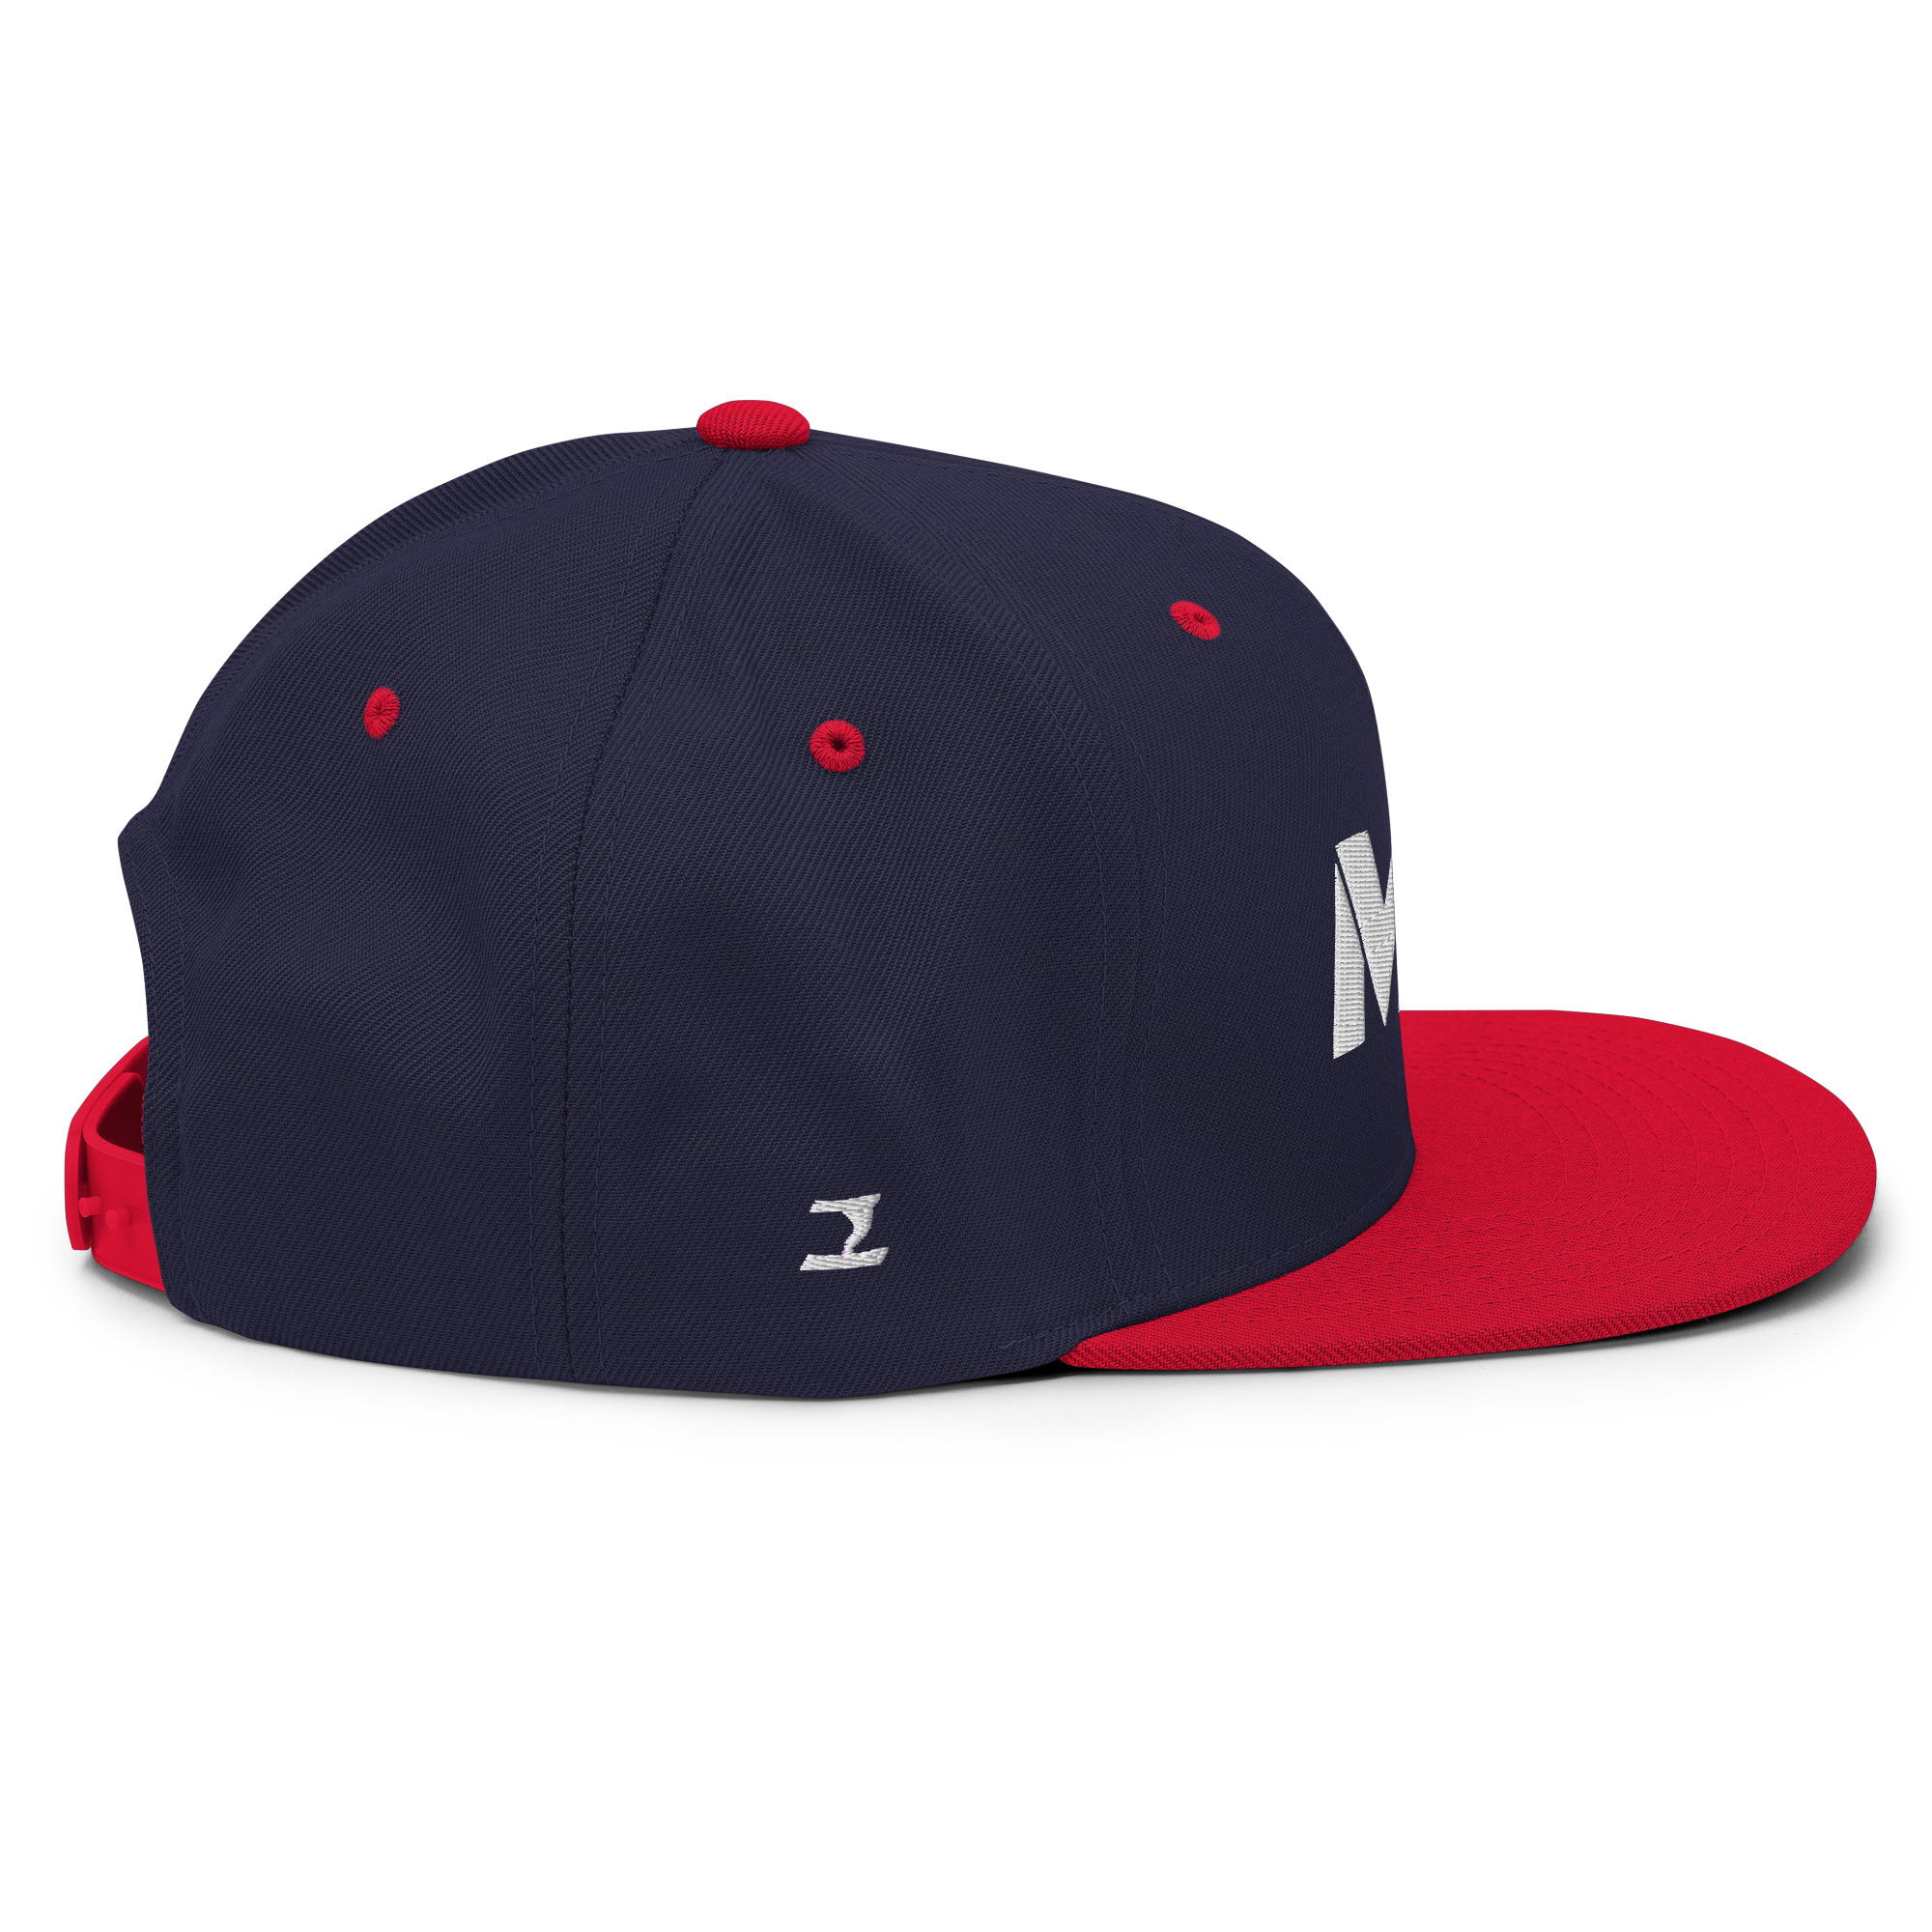 classic-snapback-navy-red-right-side-634227f820e93.jpg